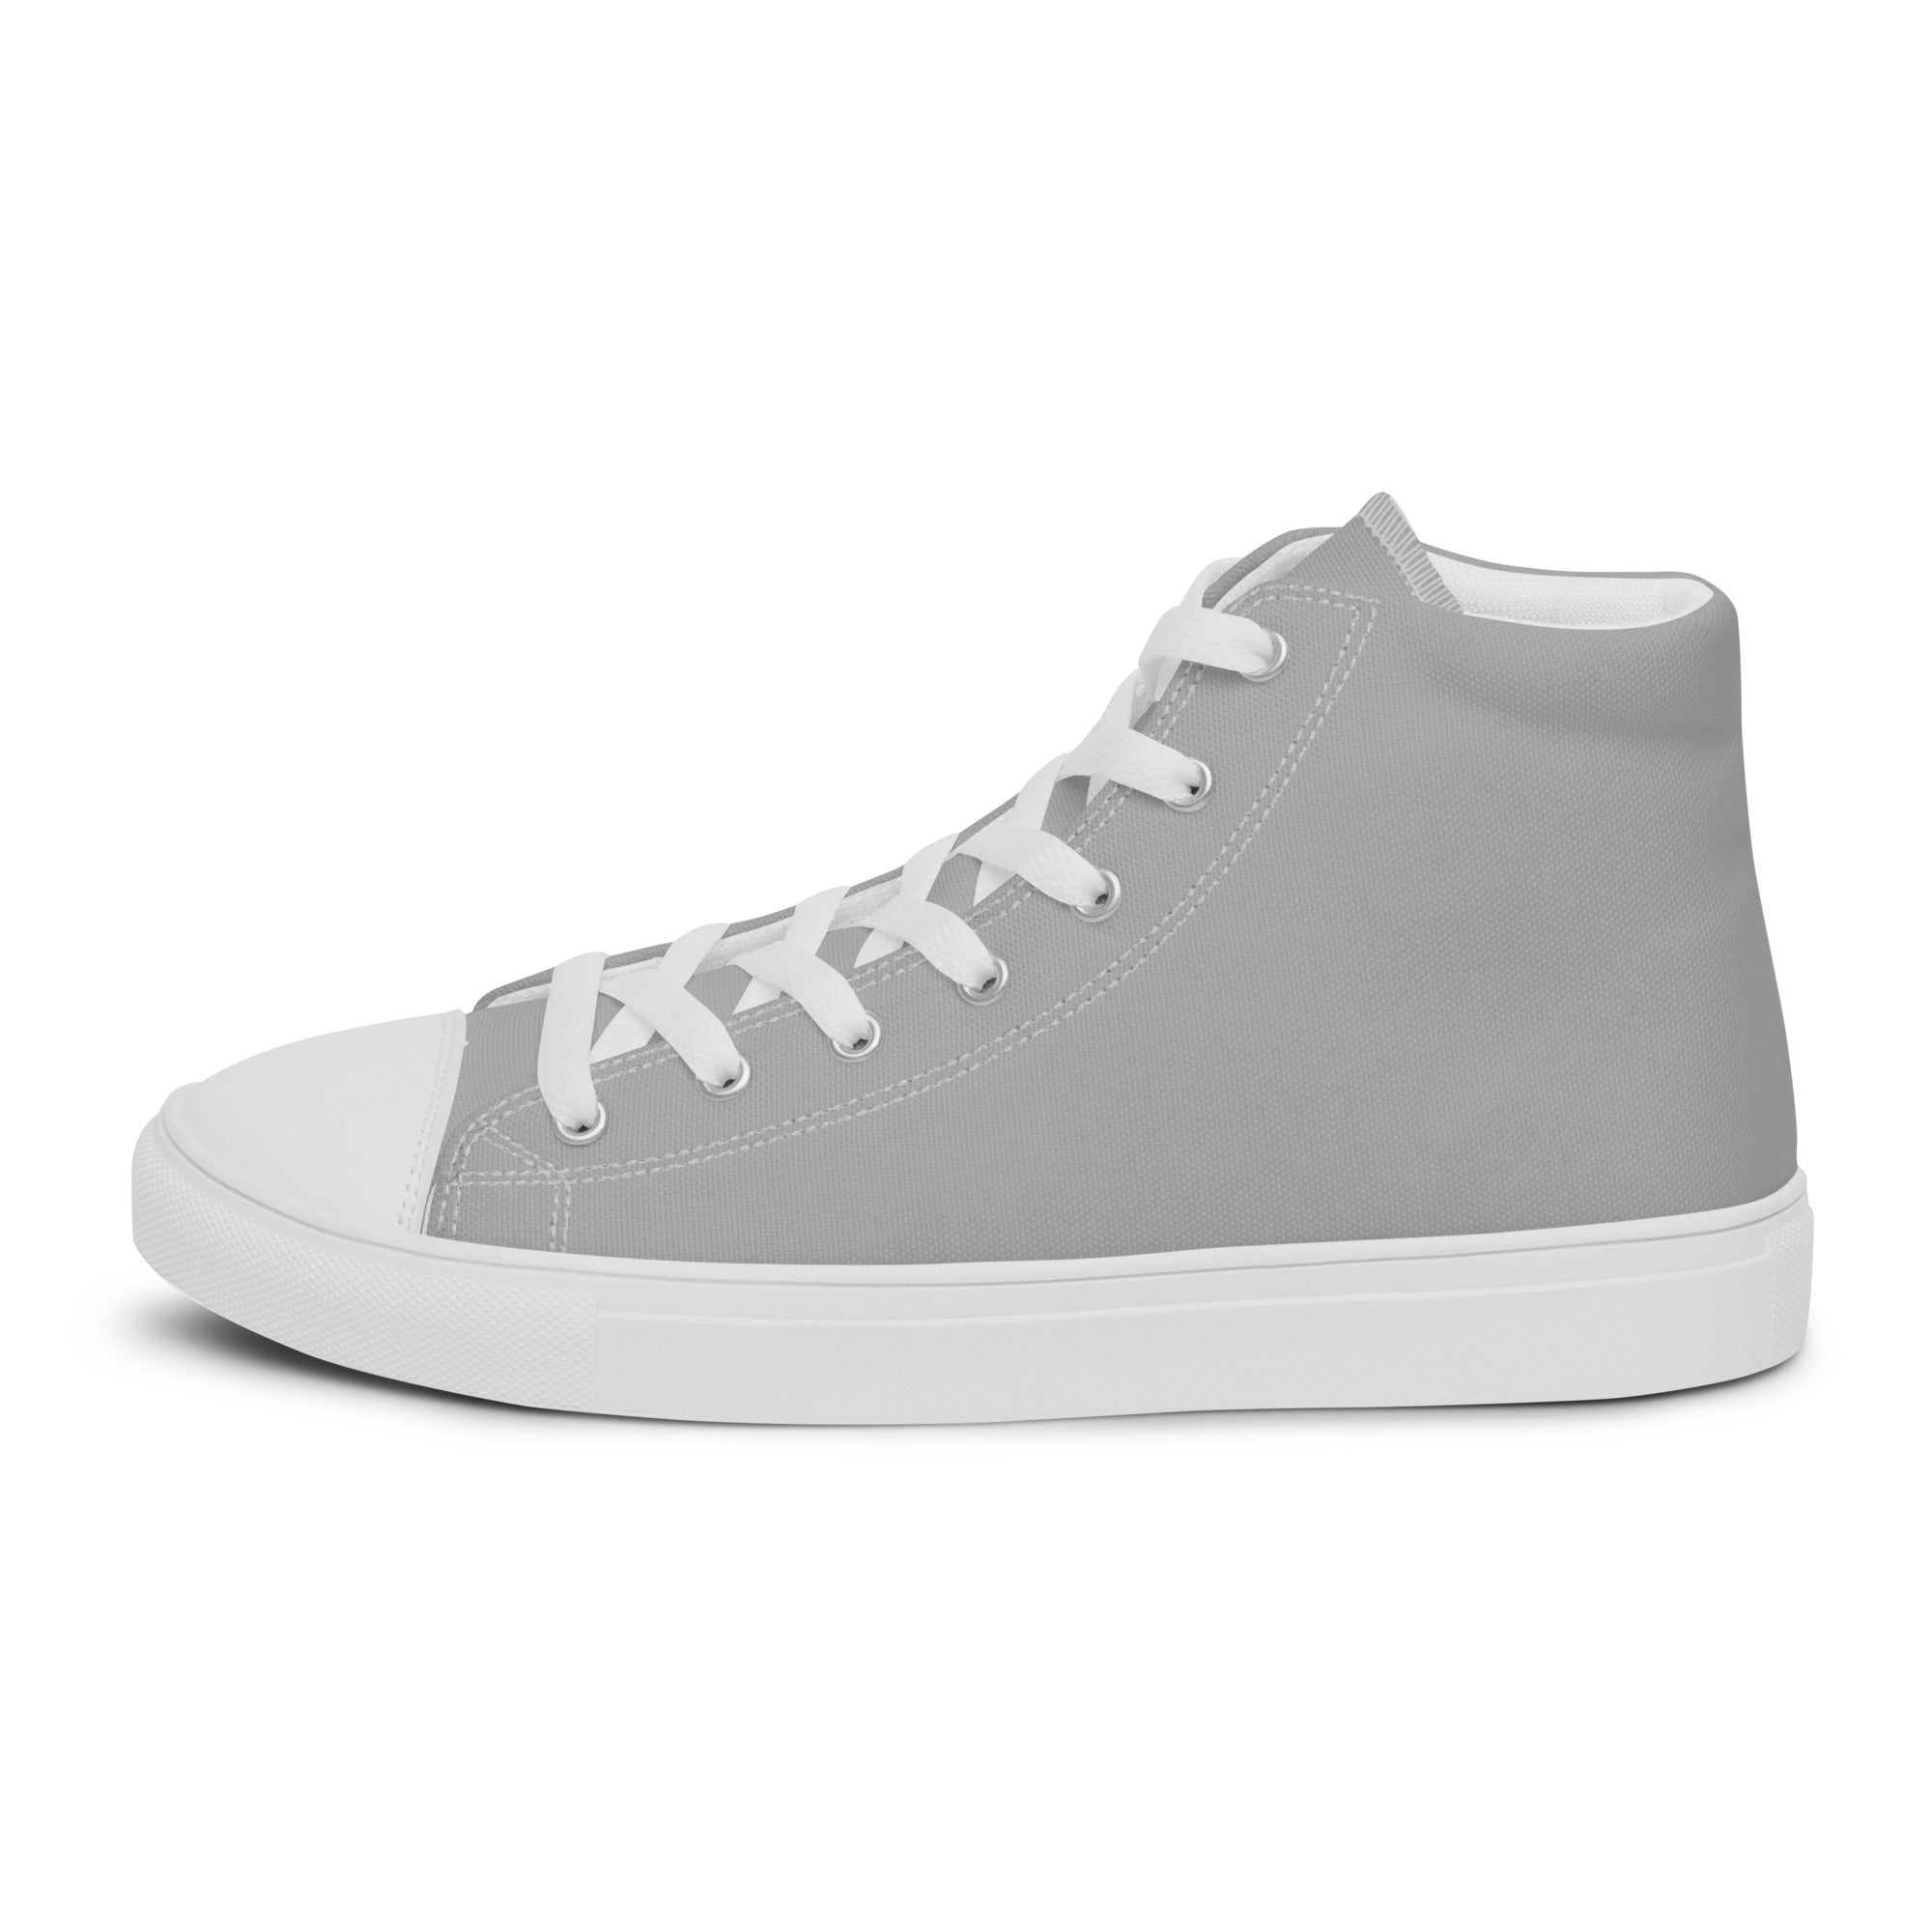 Silver High Top Canvas Shoes